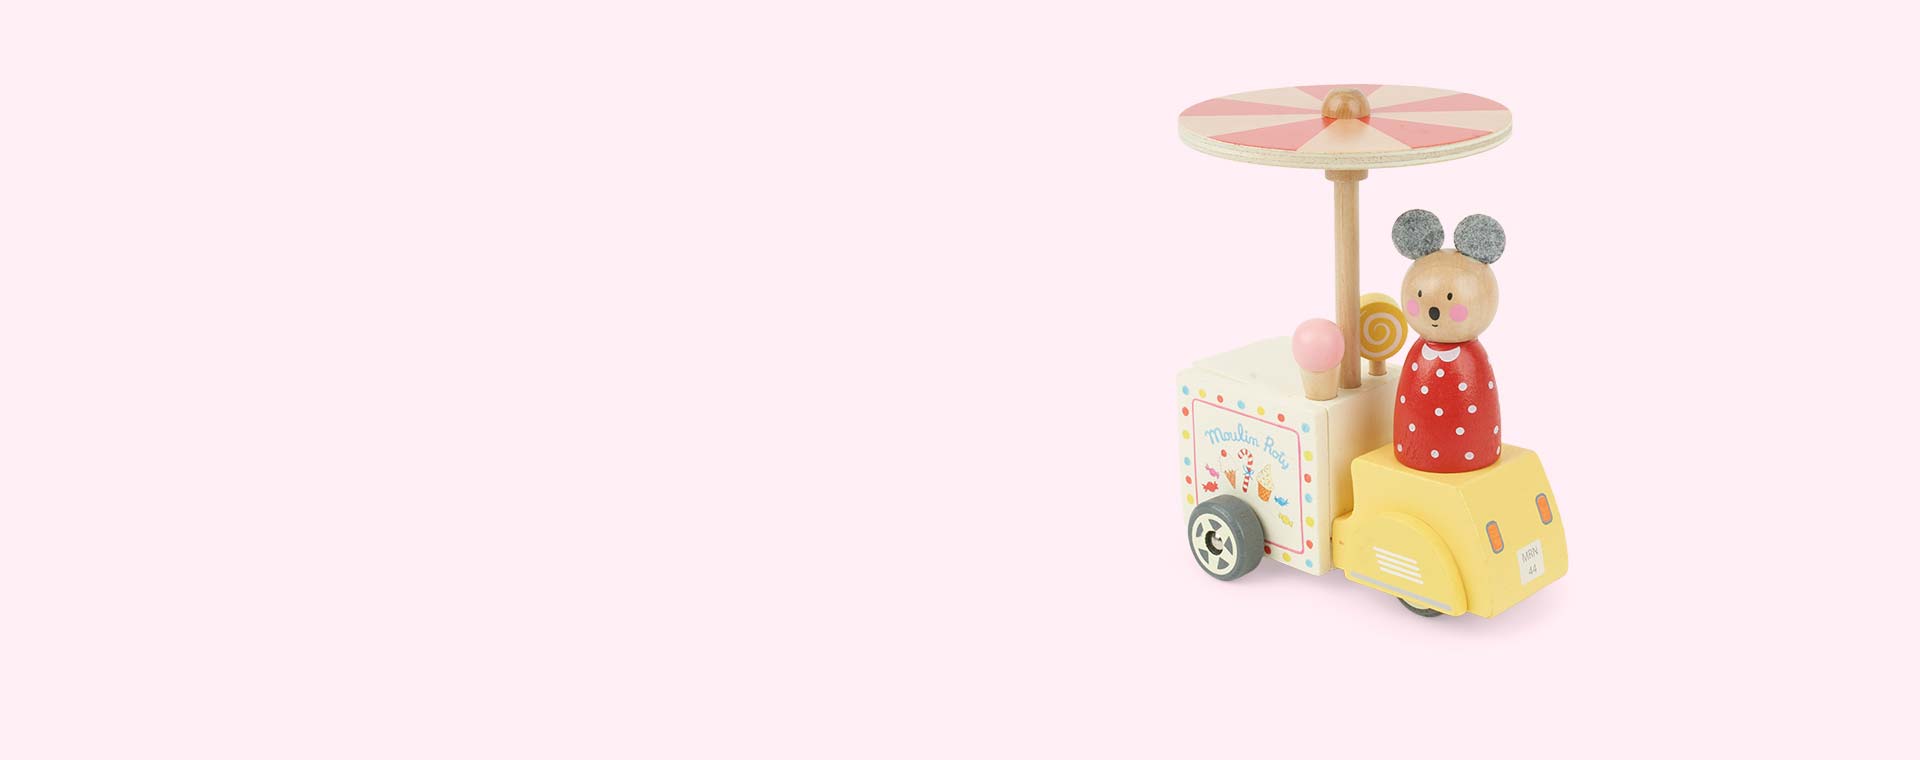 Multi Moulin Roty Ice Cream Delivery Tricycle